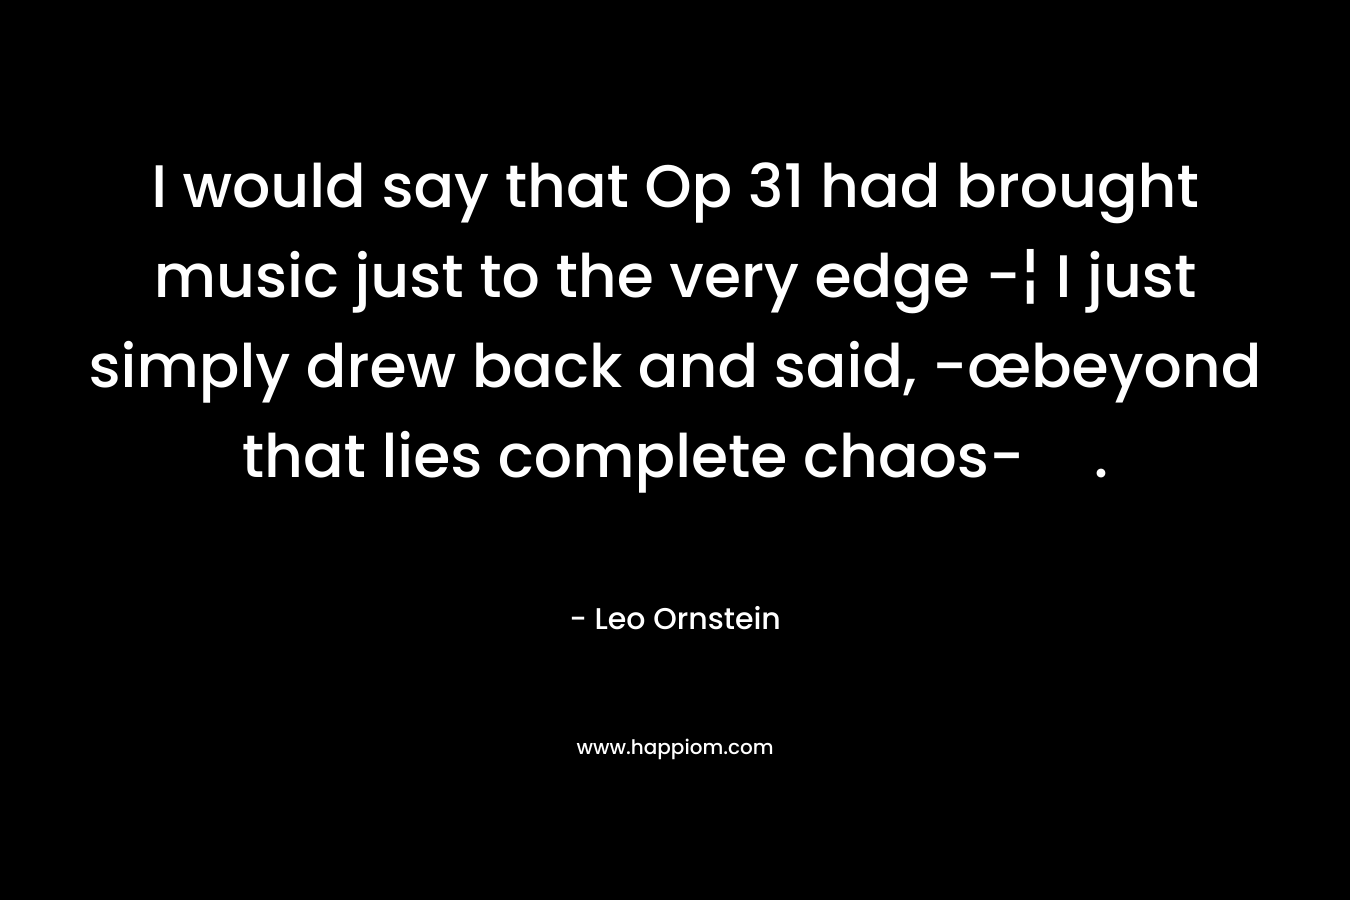 I would say that Op 31 had brought music just to the very edge -¦ I just simply drew back and said, -œbeyond that lies complete chaos-. – Leo Ornstein